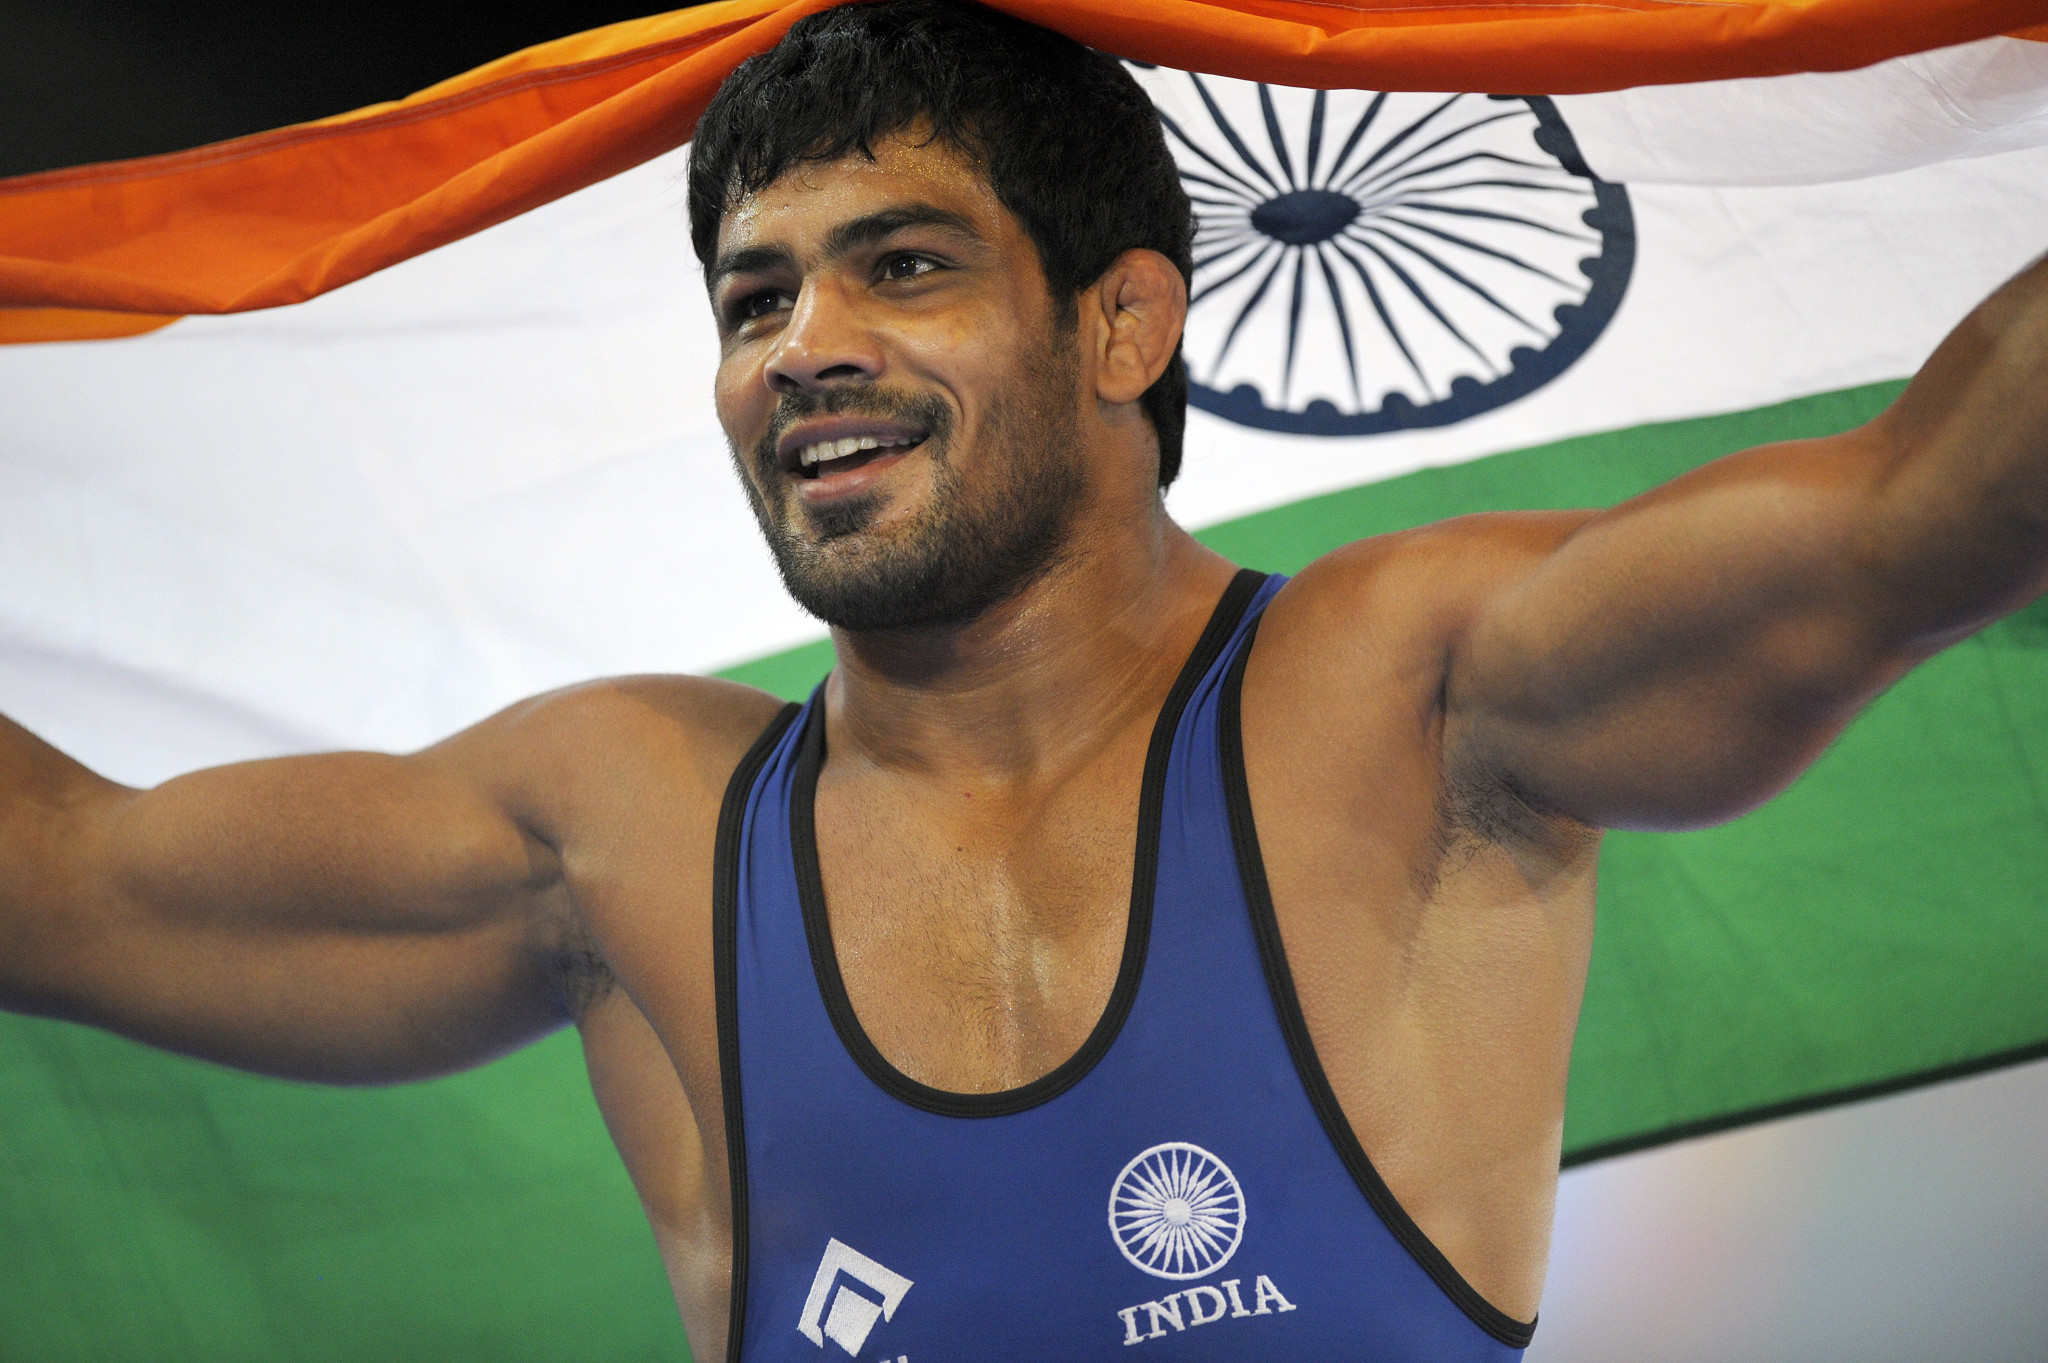 Sushil Kumar, who only returned to the international stage last month, won the 74kg title in South Africa ©Getty Images